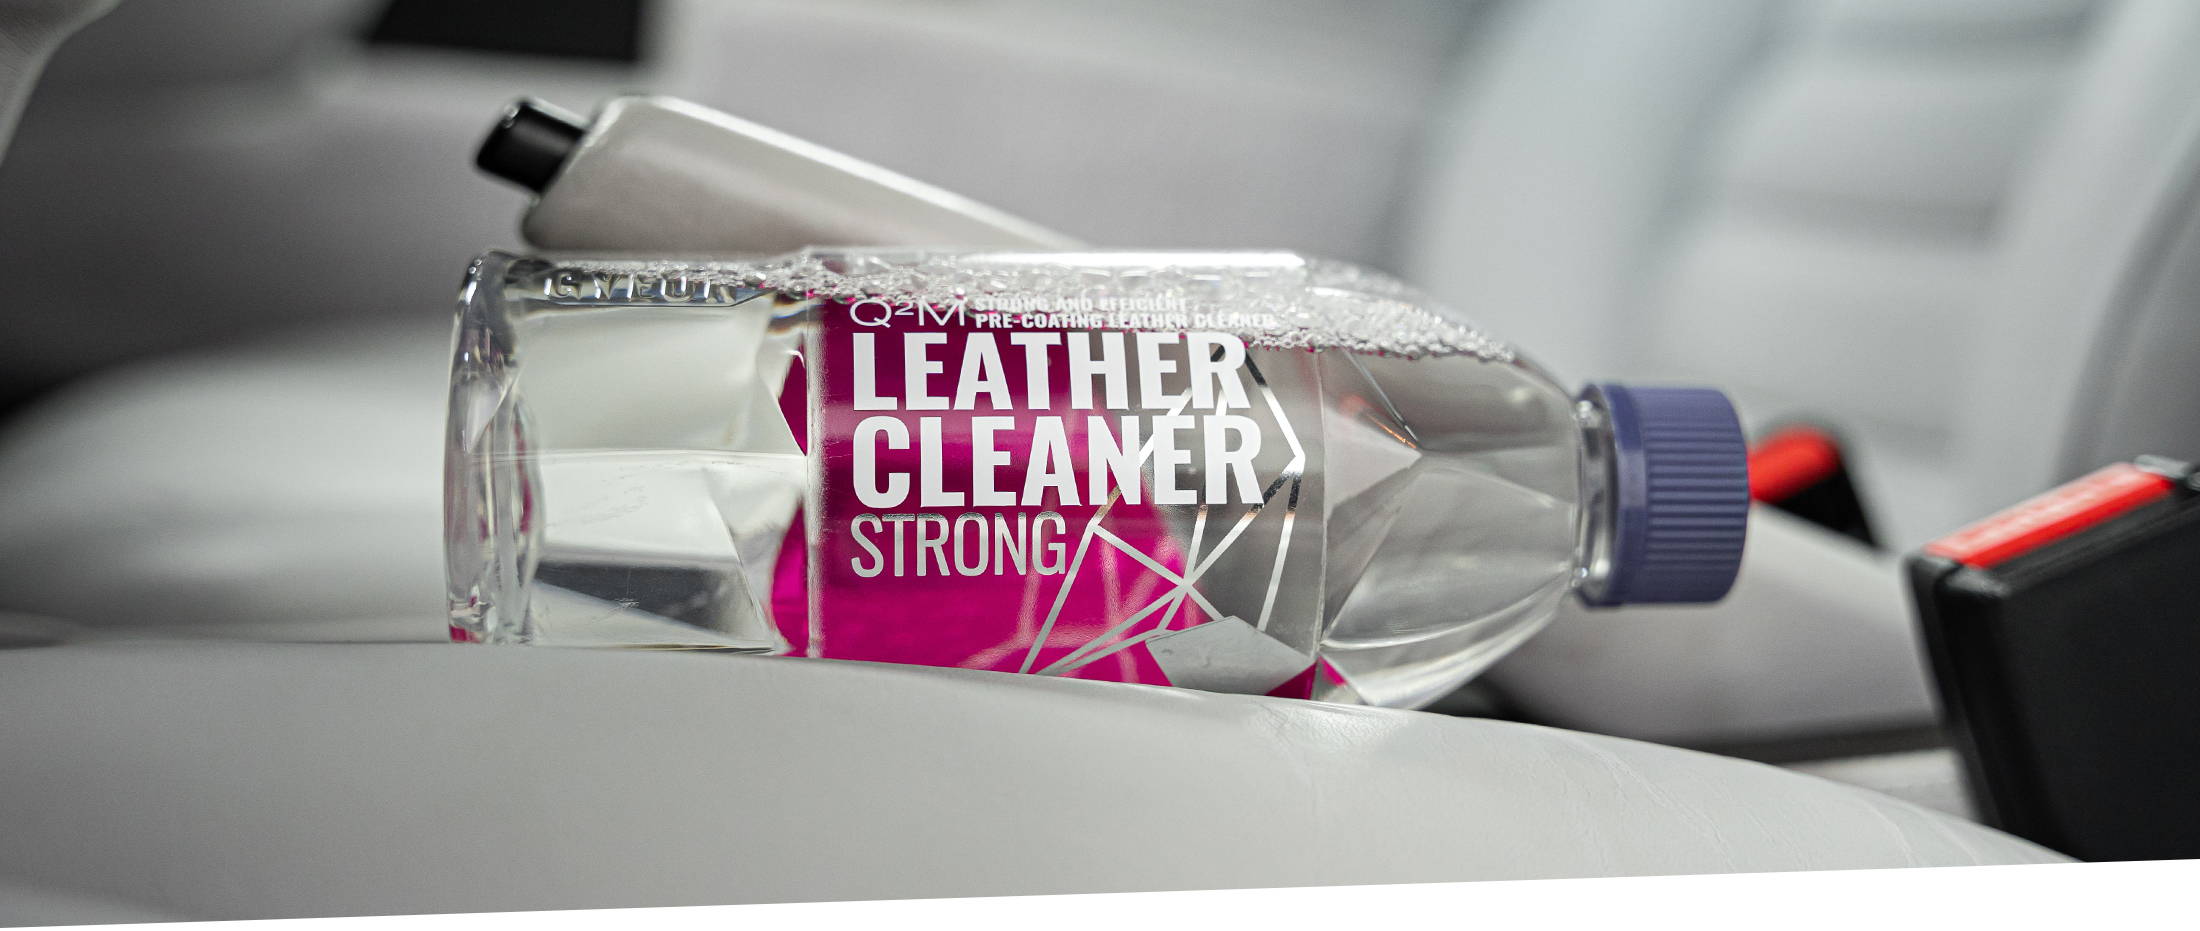 strong leather cleaner